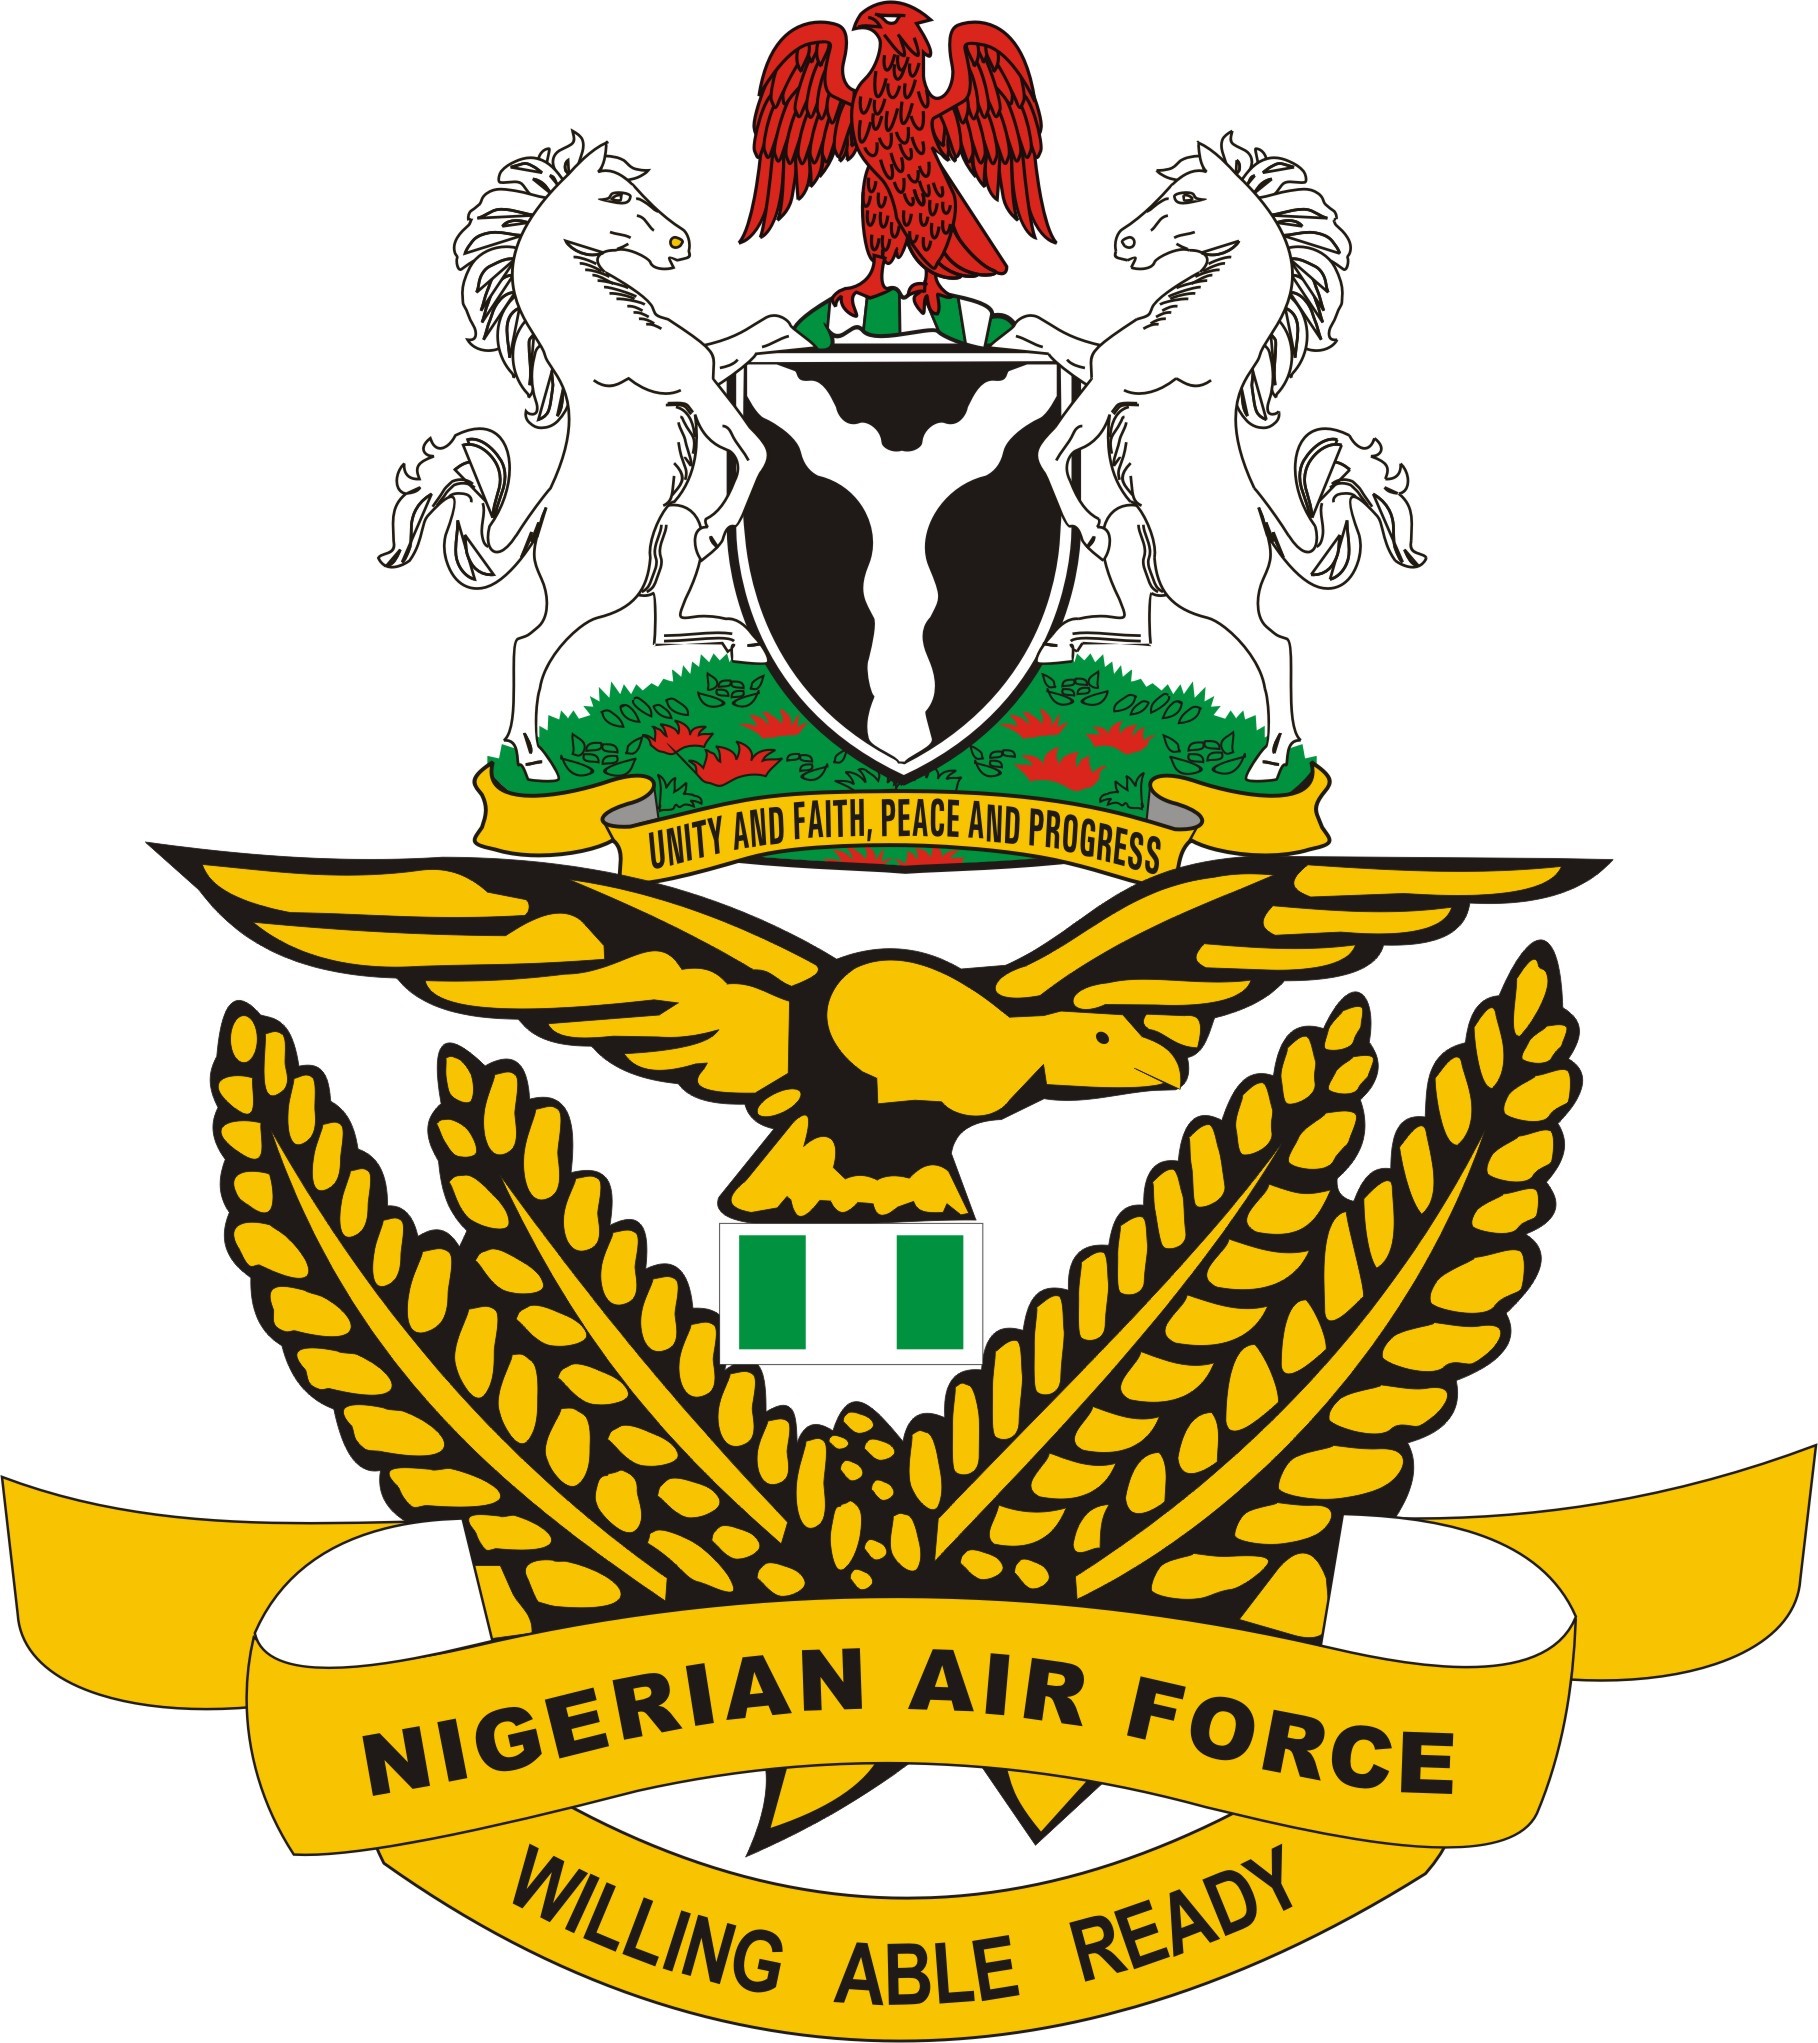 Air Force Commander pledges support in fight against kidnapping, oil theft in Niger Delta